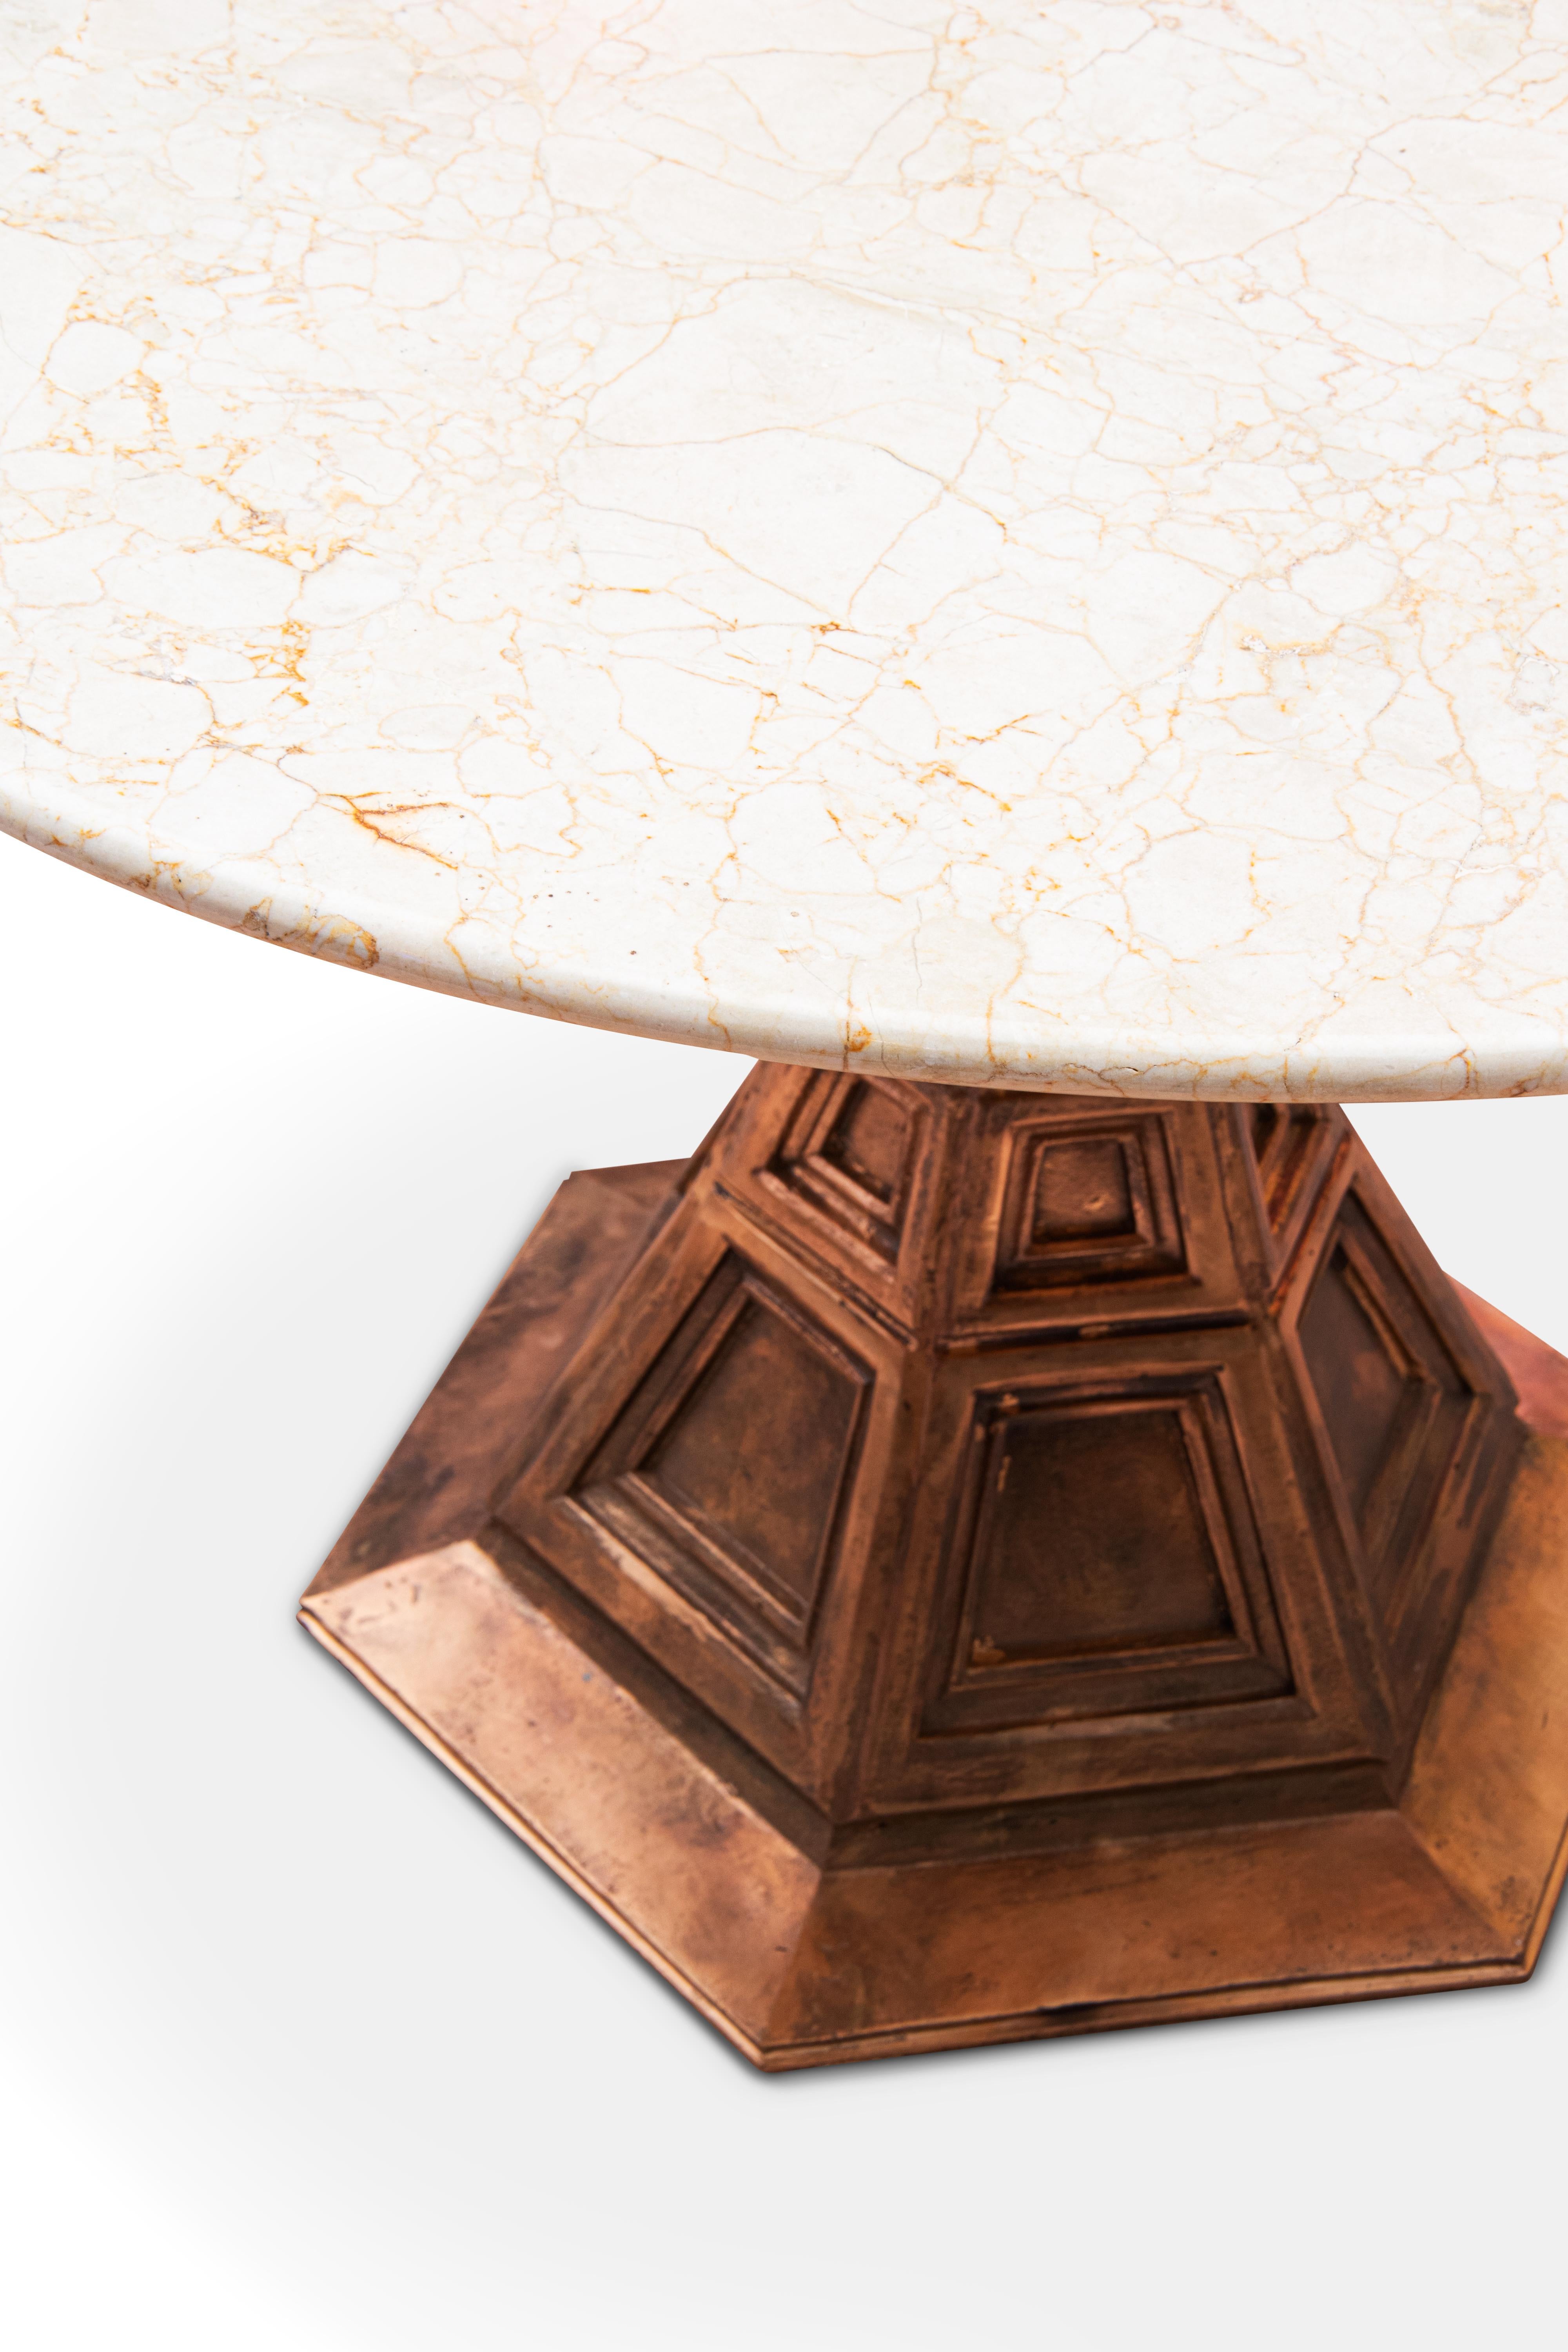 Post-Modern Contemporary Art   Table PROSPETTICA   Marble & Metal   by Paolo Portoghesi For Sale